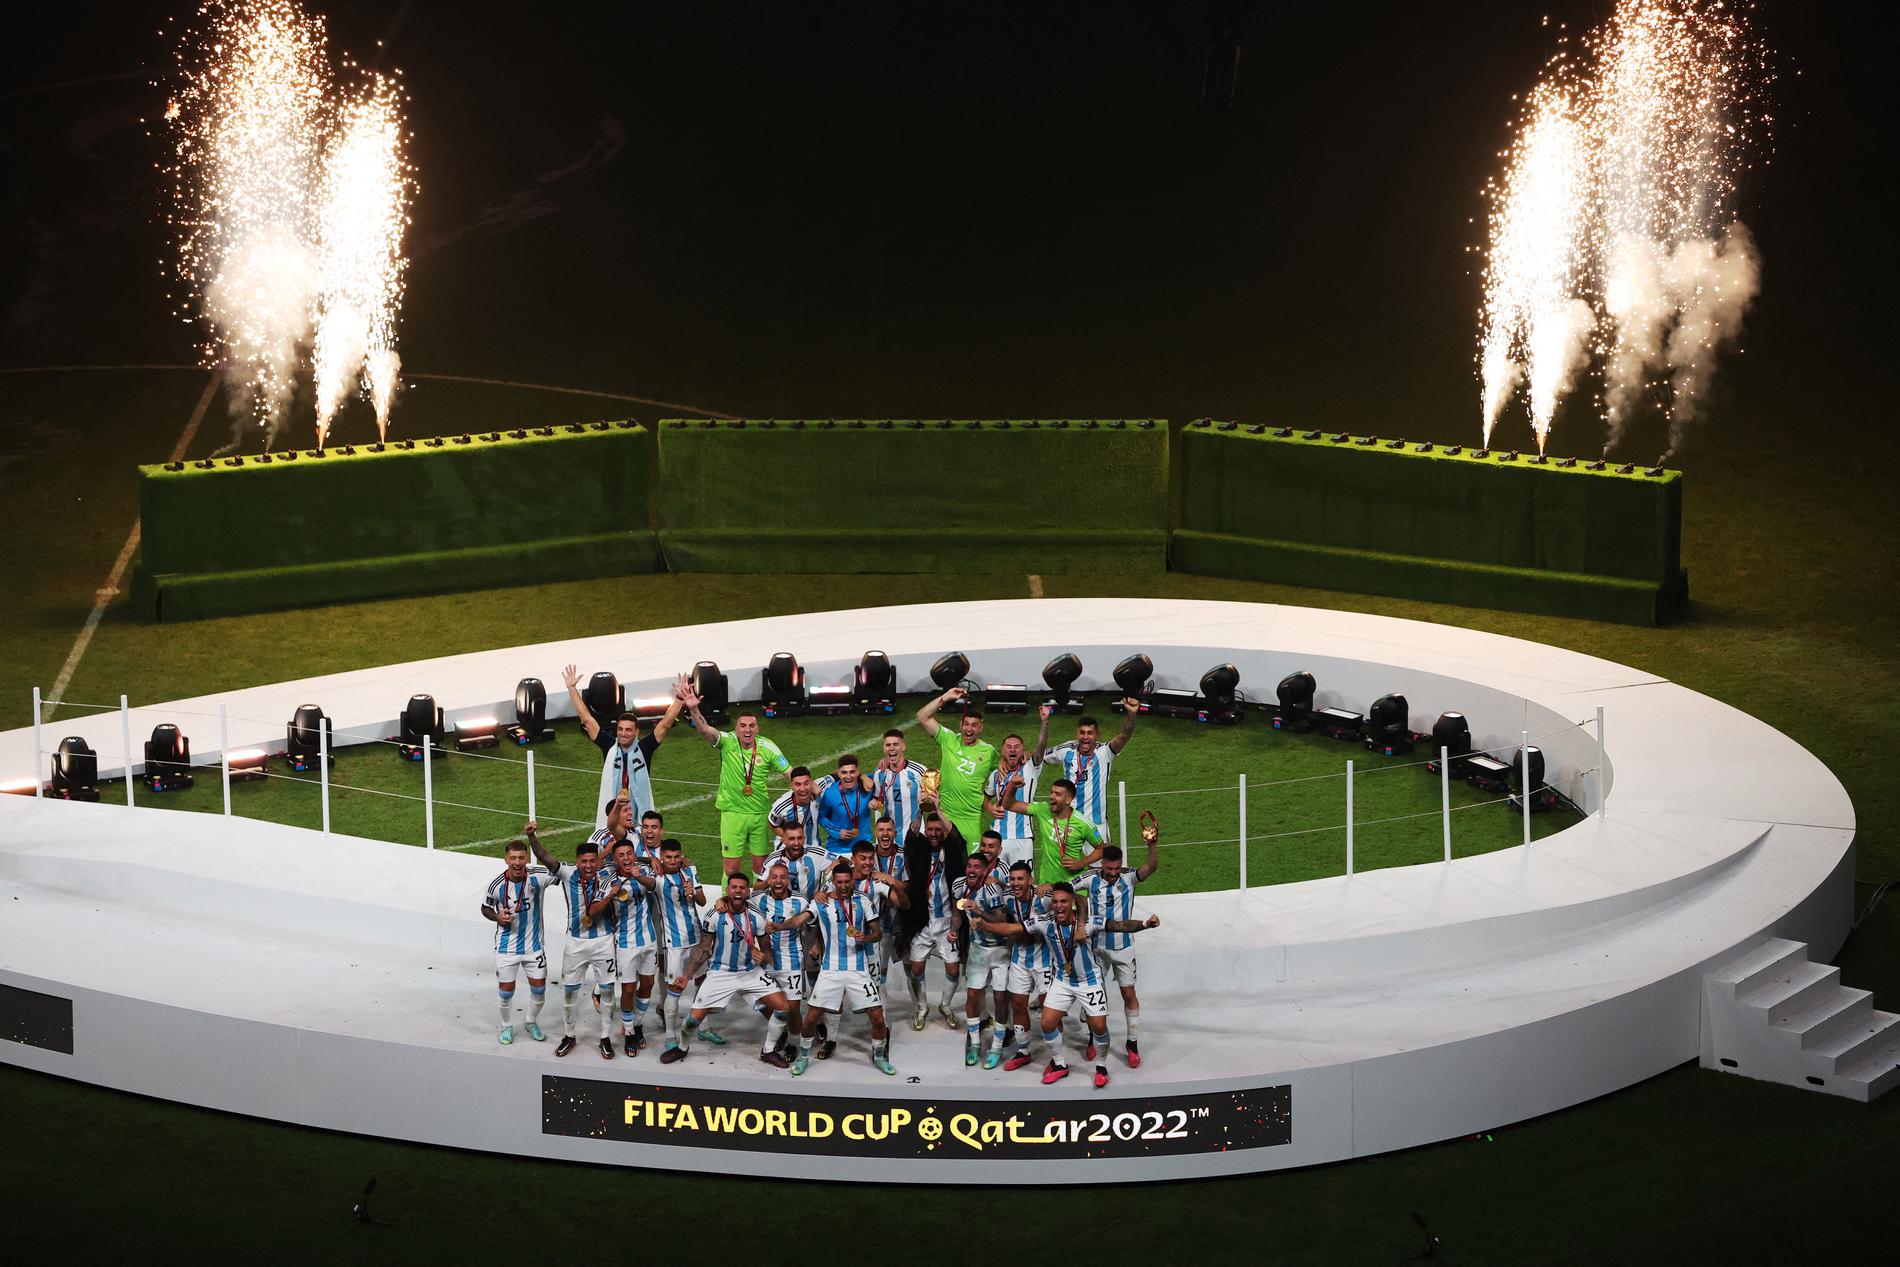 Rejection of NRK and TV 2 in the Qatar World Cup: – Error in comparison